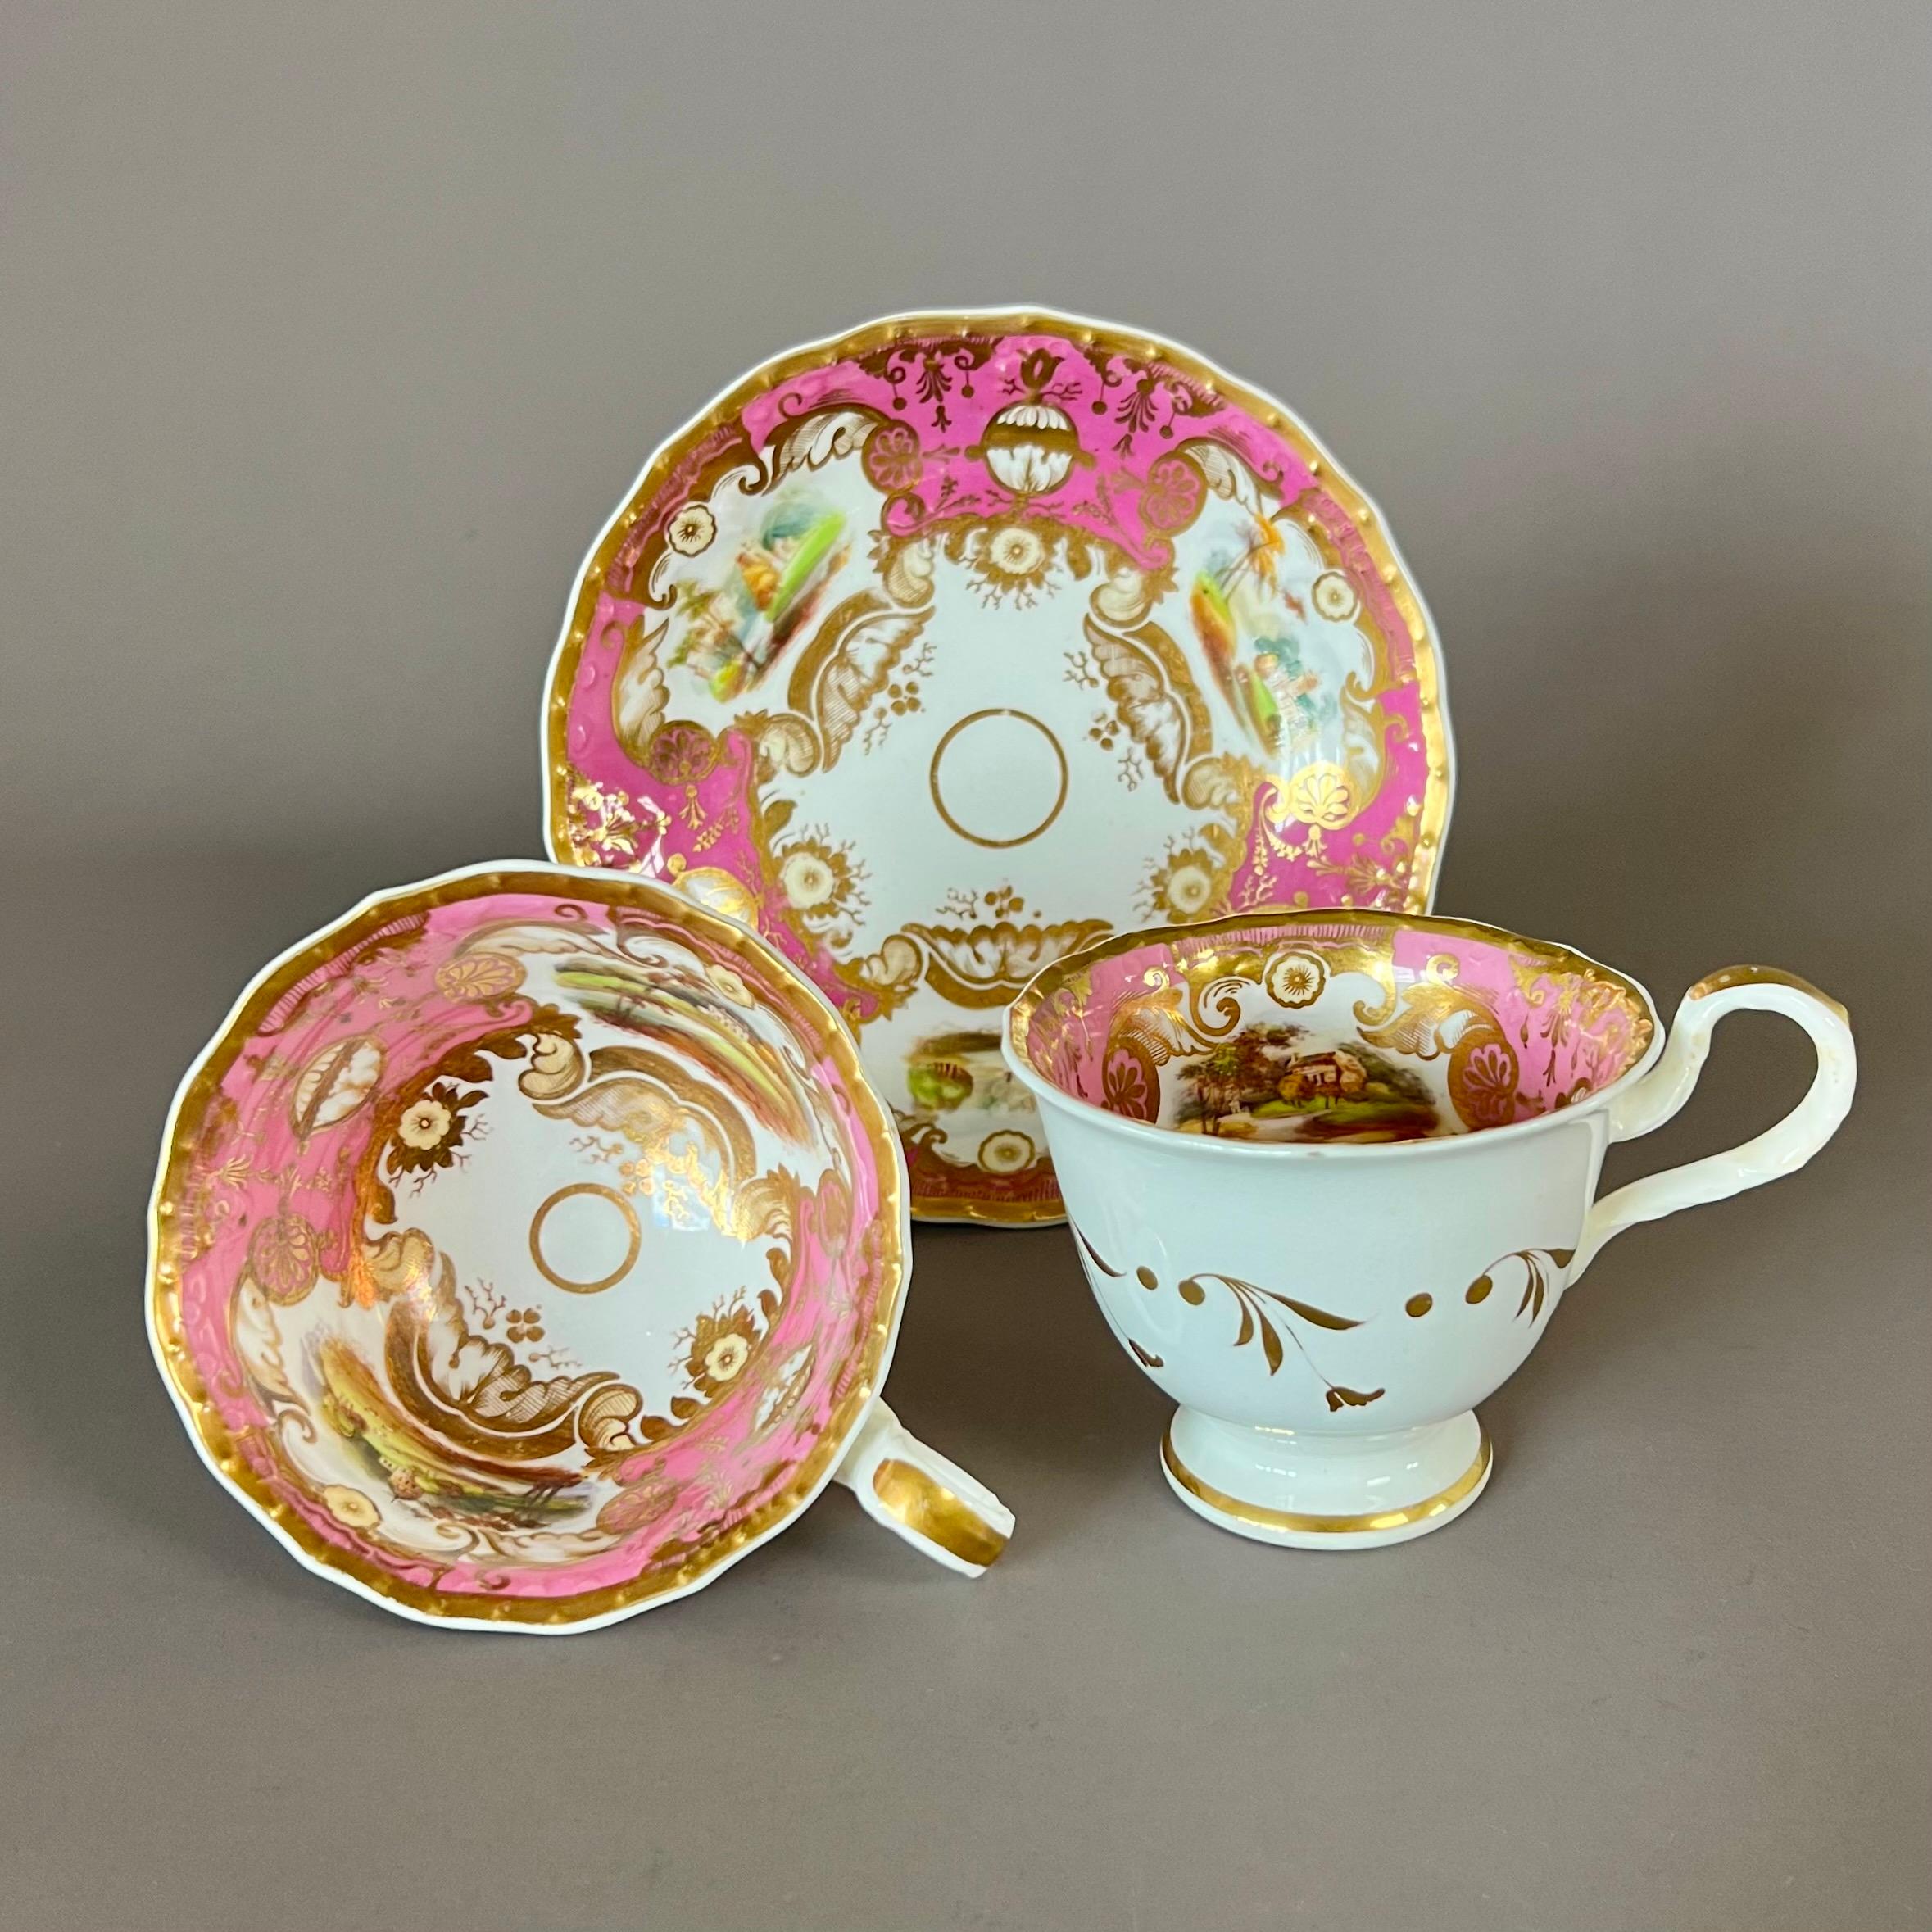 A “true trio” consisting of a teacup, coffee cup and saucer in “bell embossed” shape, pink ground with elaborate gilt and very finely painted landscape reserves

Pattern 2464
Year: ca 1827
Size: teacup 10cm (4“), coffee cup 8.2cm (3.25“), saucer